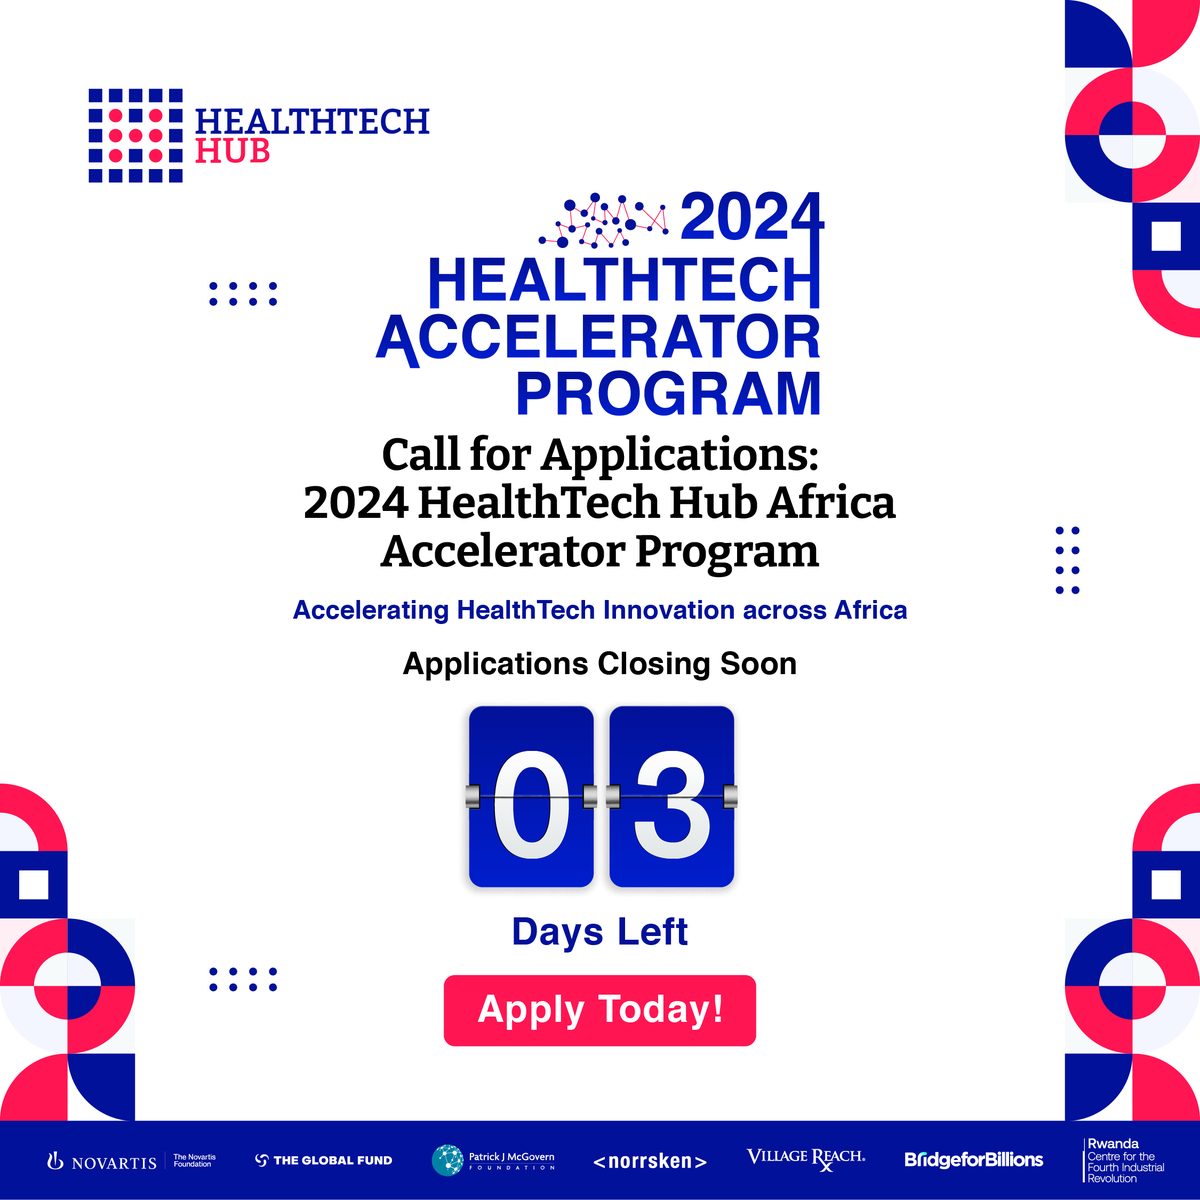 Application closing soon! You have three days left to position your venture for growth. Take advantage of the opportunity to shape a promising future for your venture. For more information and to apply: thehealthtech.org #HTHA2024 #AfricanStartups #Ventures #startups